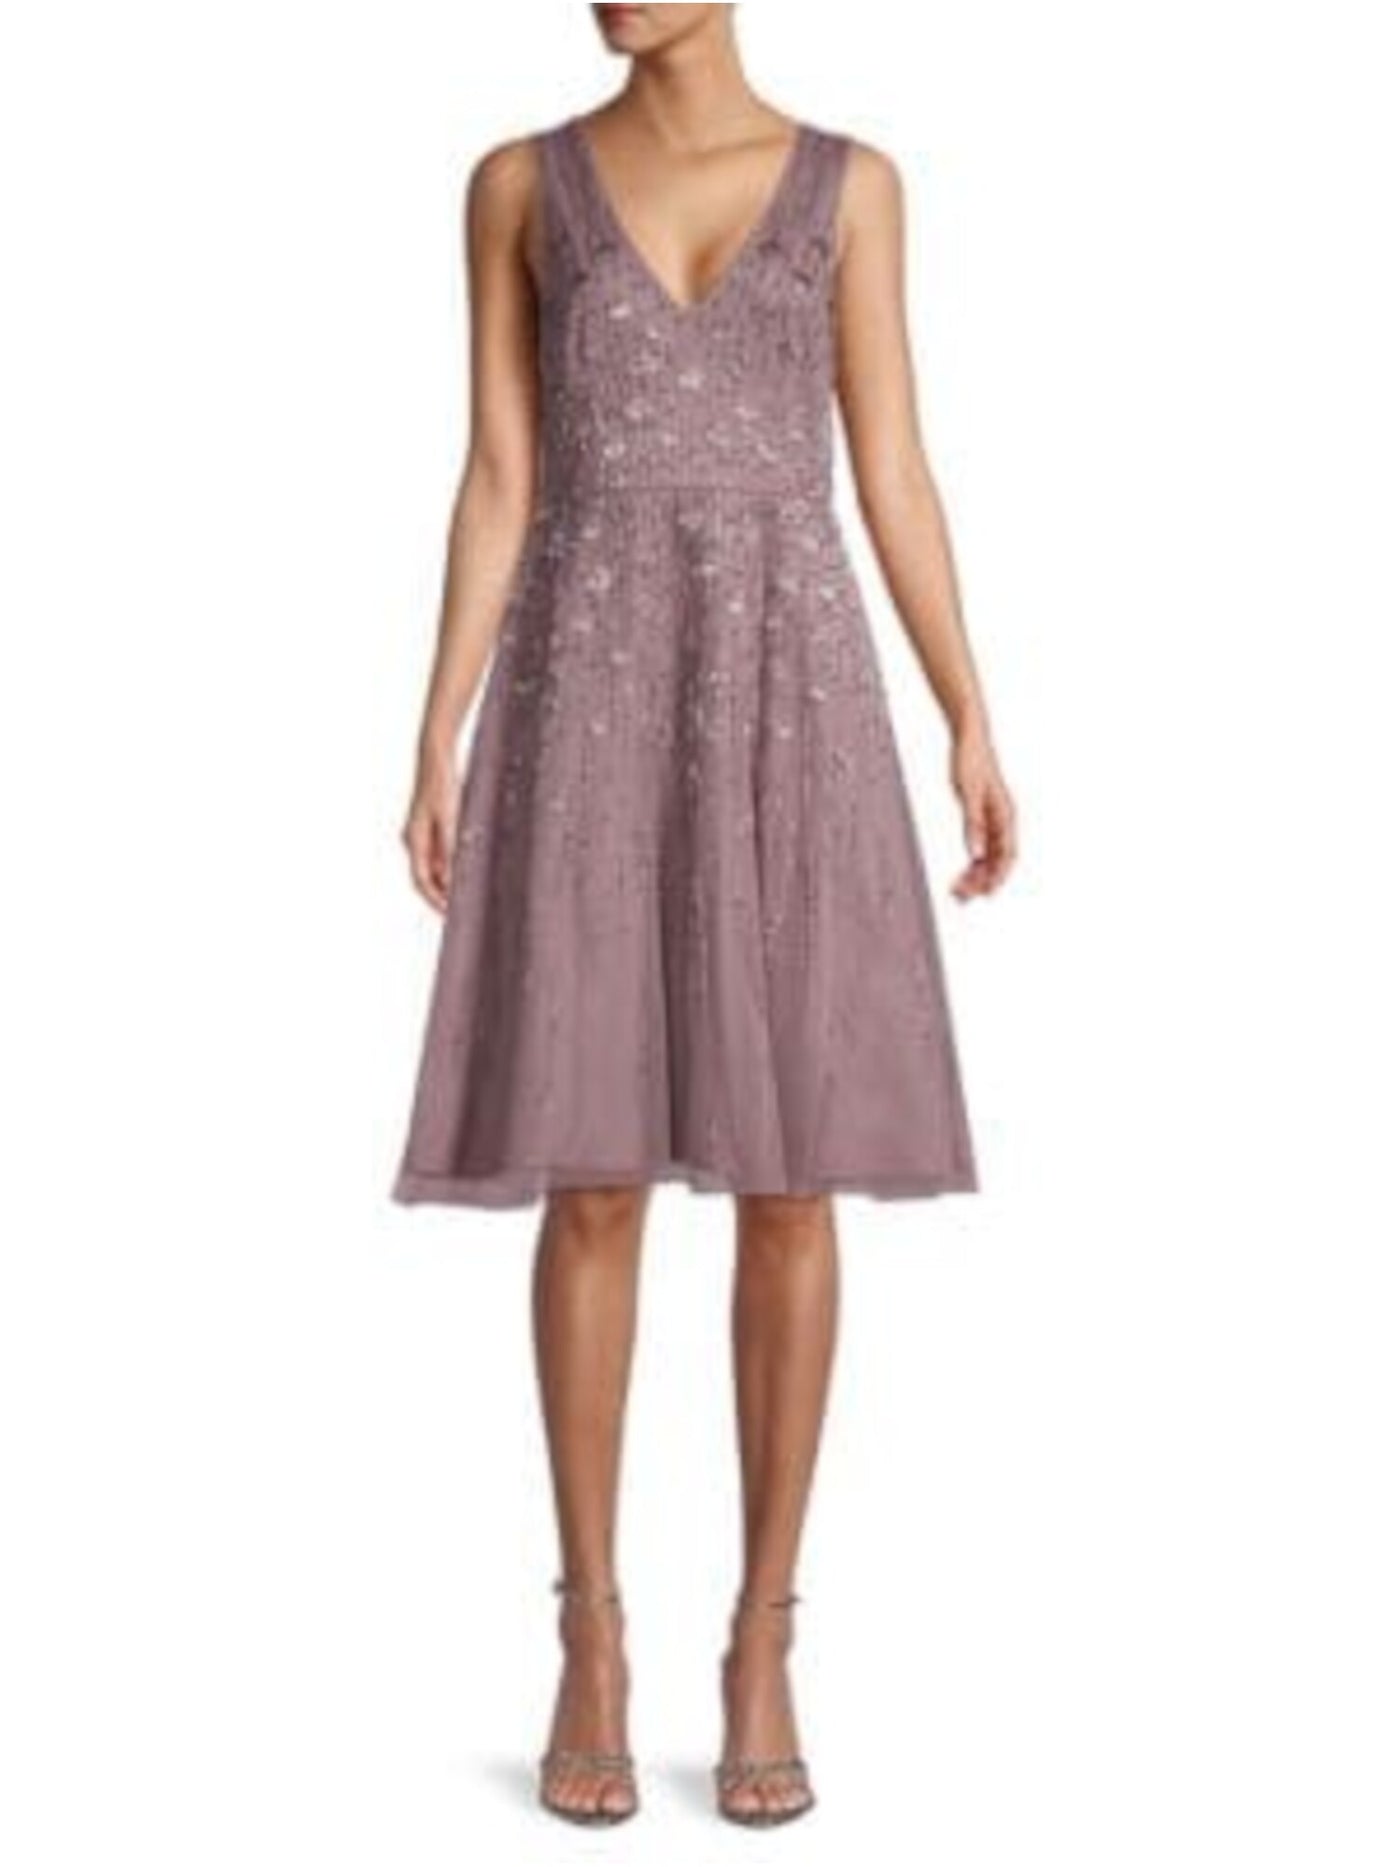 AIDAN MATTOX Womens Purple Embellished Sequined Sleeveless V Neck Knee Length Cocktail Fit + Flare Dress 6